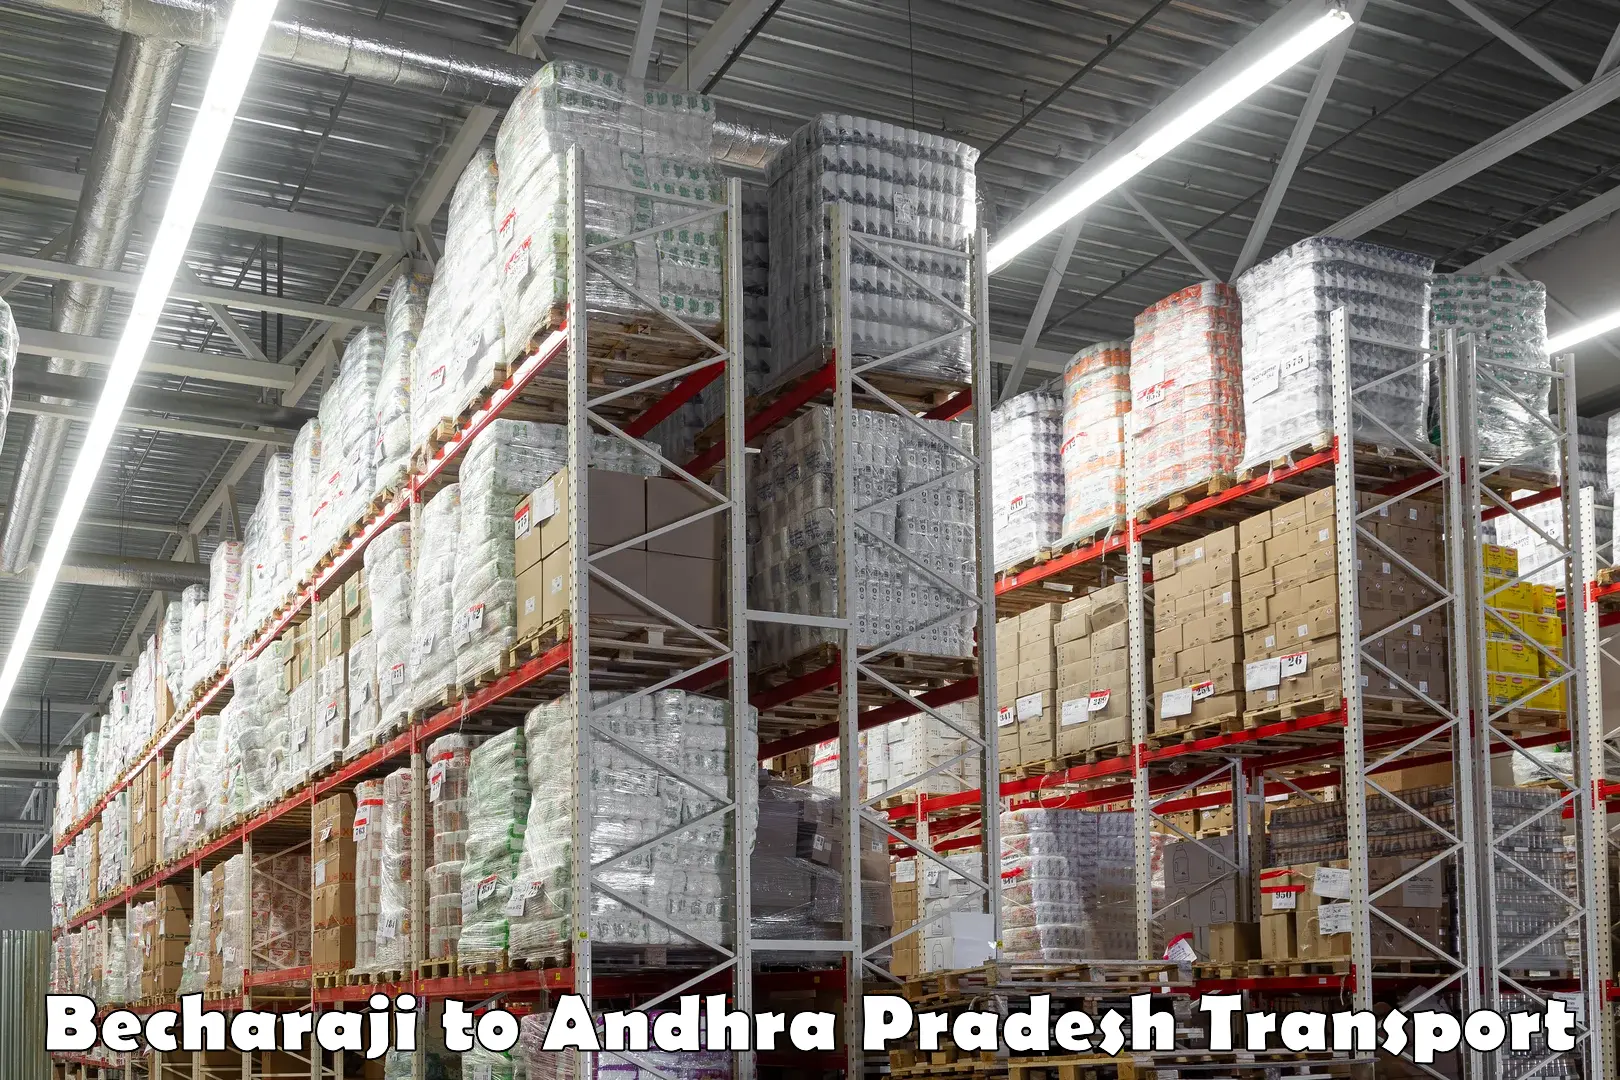 Part load transport service in India Becharaji to Addateegala